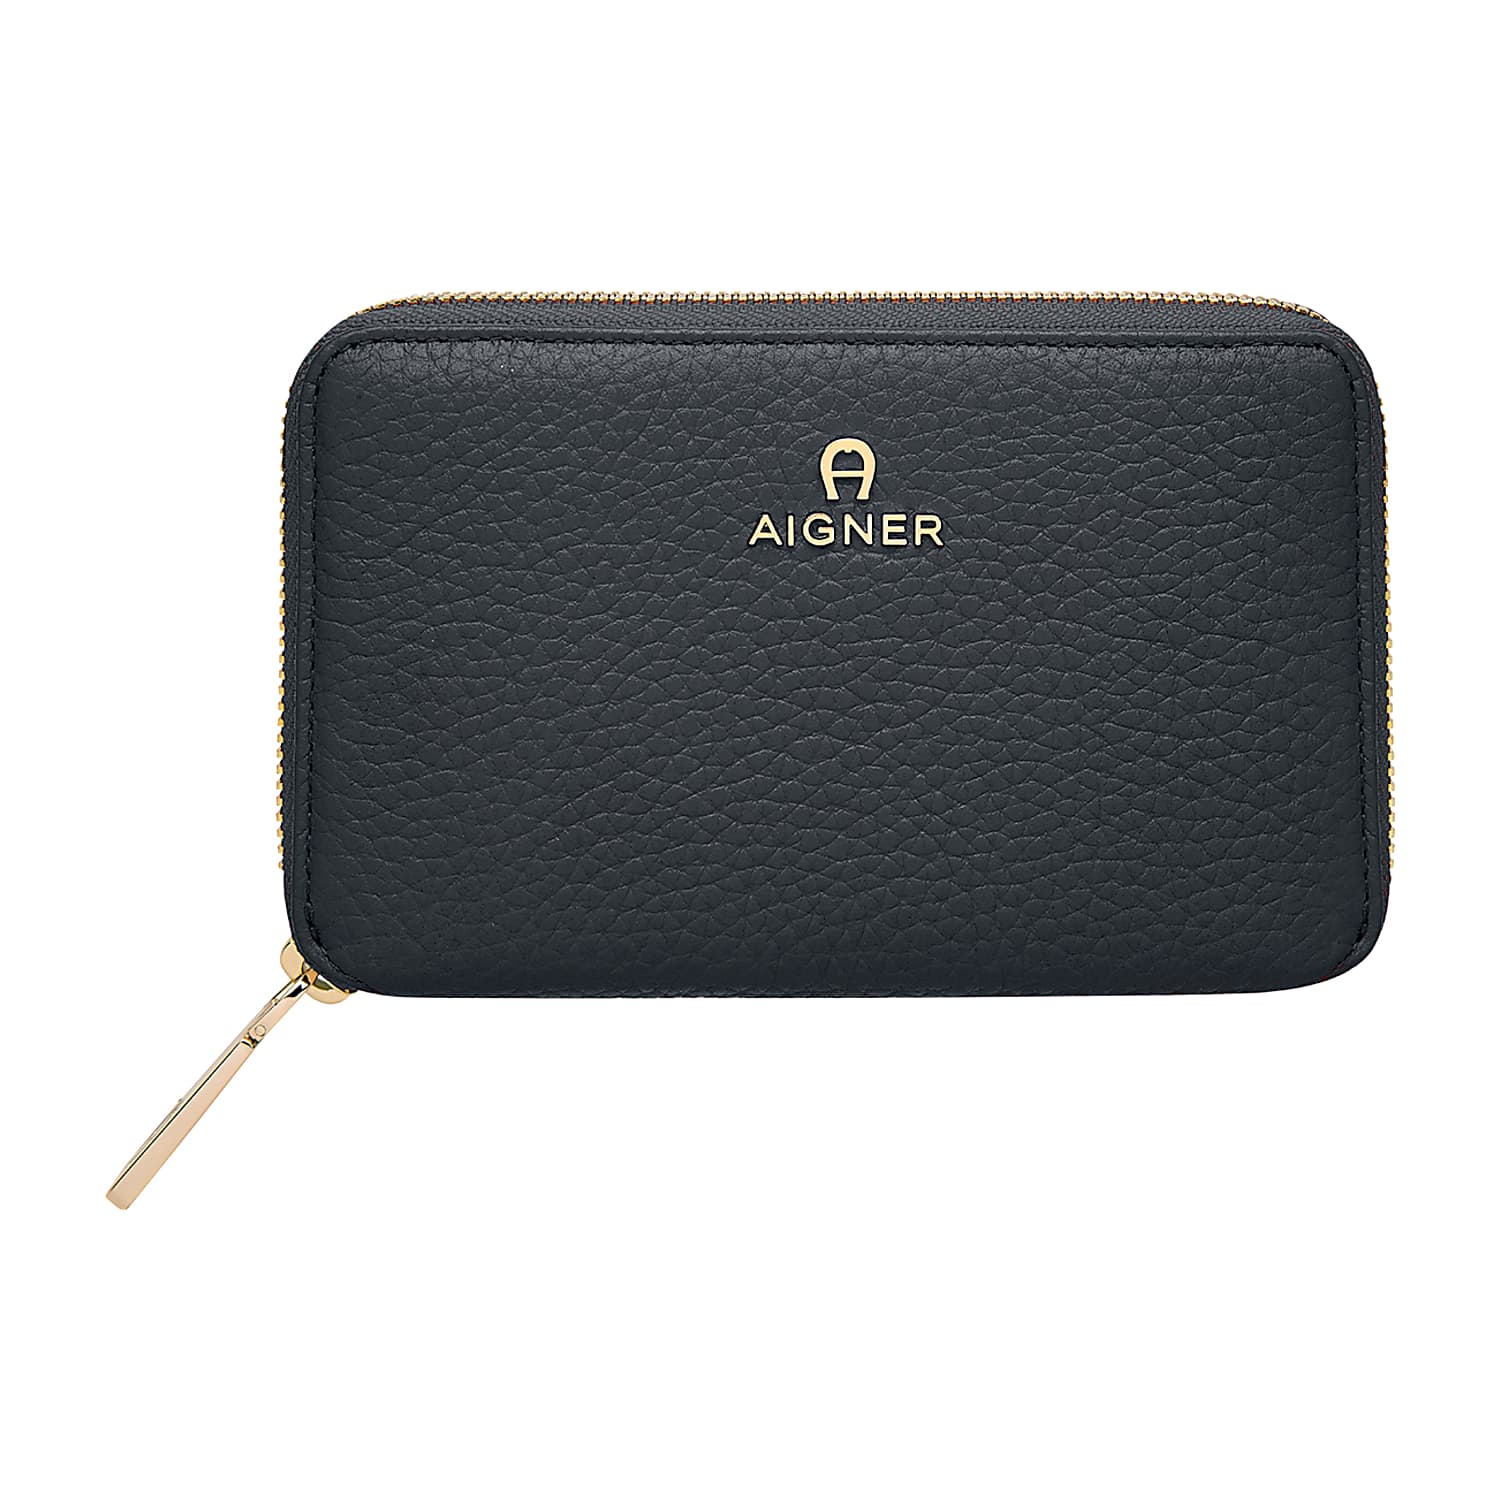 Ivy Wallet with Zipper